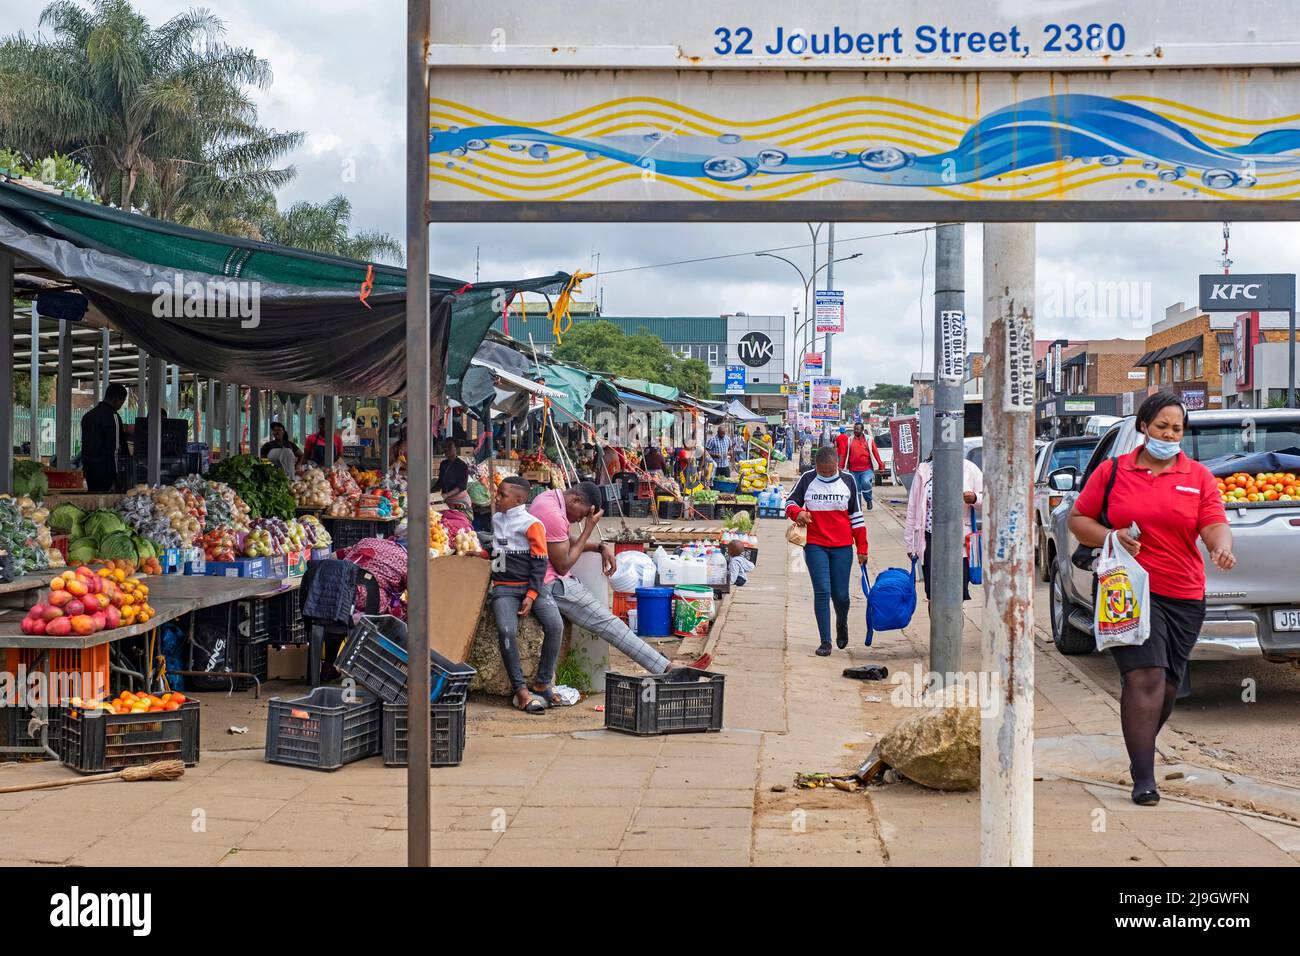 Food market stalls in the main street of the town Piet Retief / Mkhondo, Gert Sibande, Mpumalanga province, South Africa Stock Photo